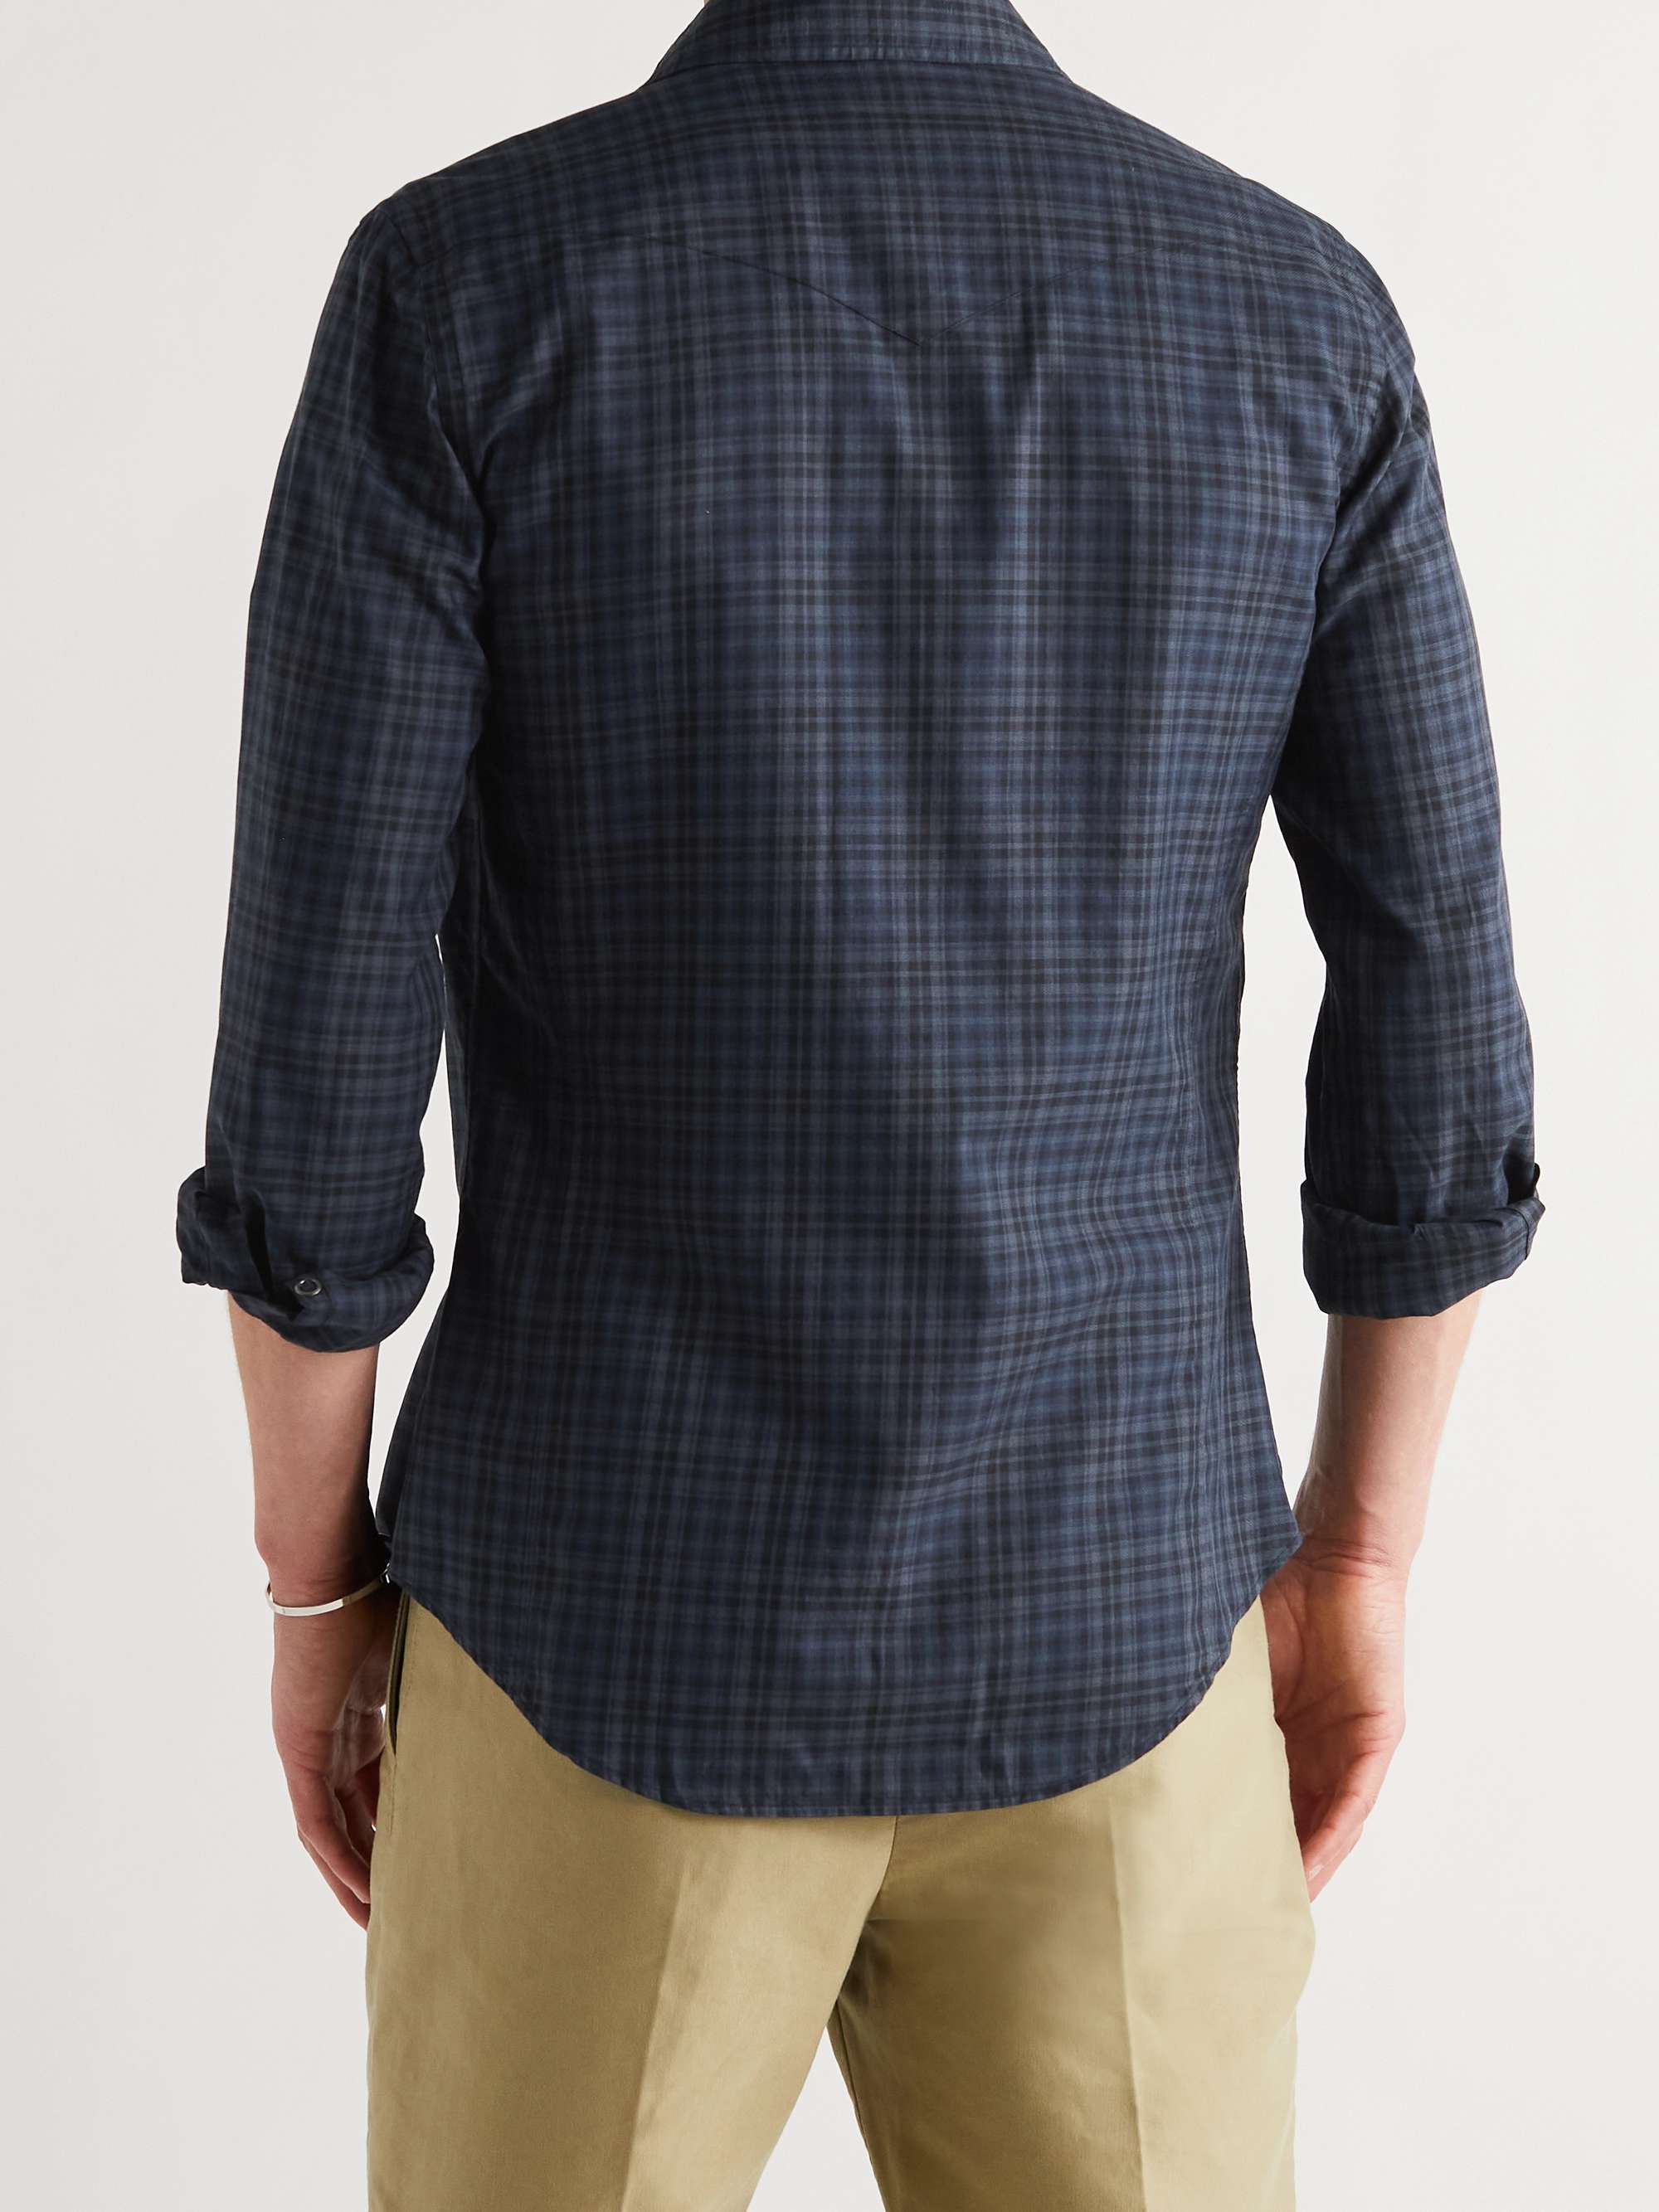 TOM FORD Slim-Fit Checked Cotton Western Shirt